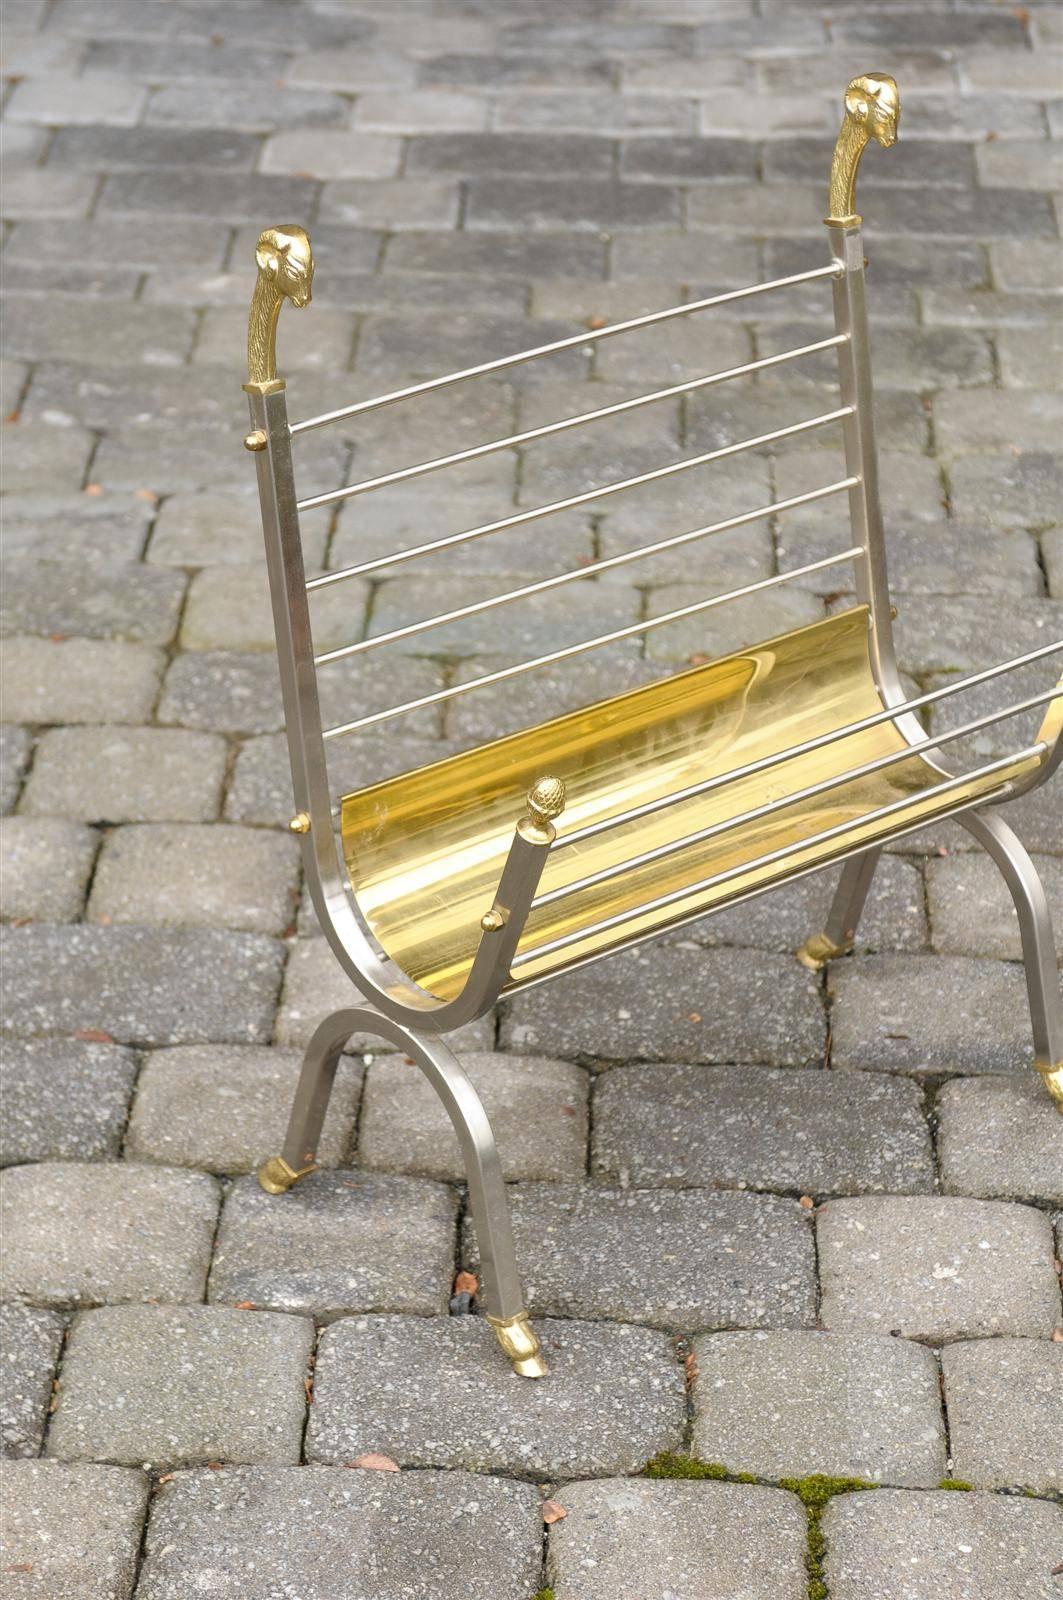 This vintage Italian magazine rack is made of steel and brass. Dated, circa 1970, it is reminiscent of Maison Jansen, in its sleek shape and use of materials. The elegant sides are adorned with discreet brass rams heads and acorn finials while the